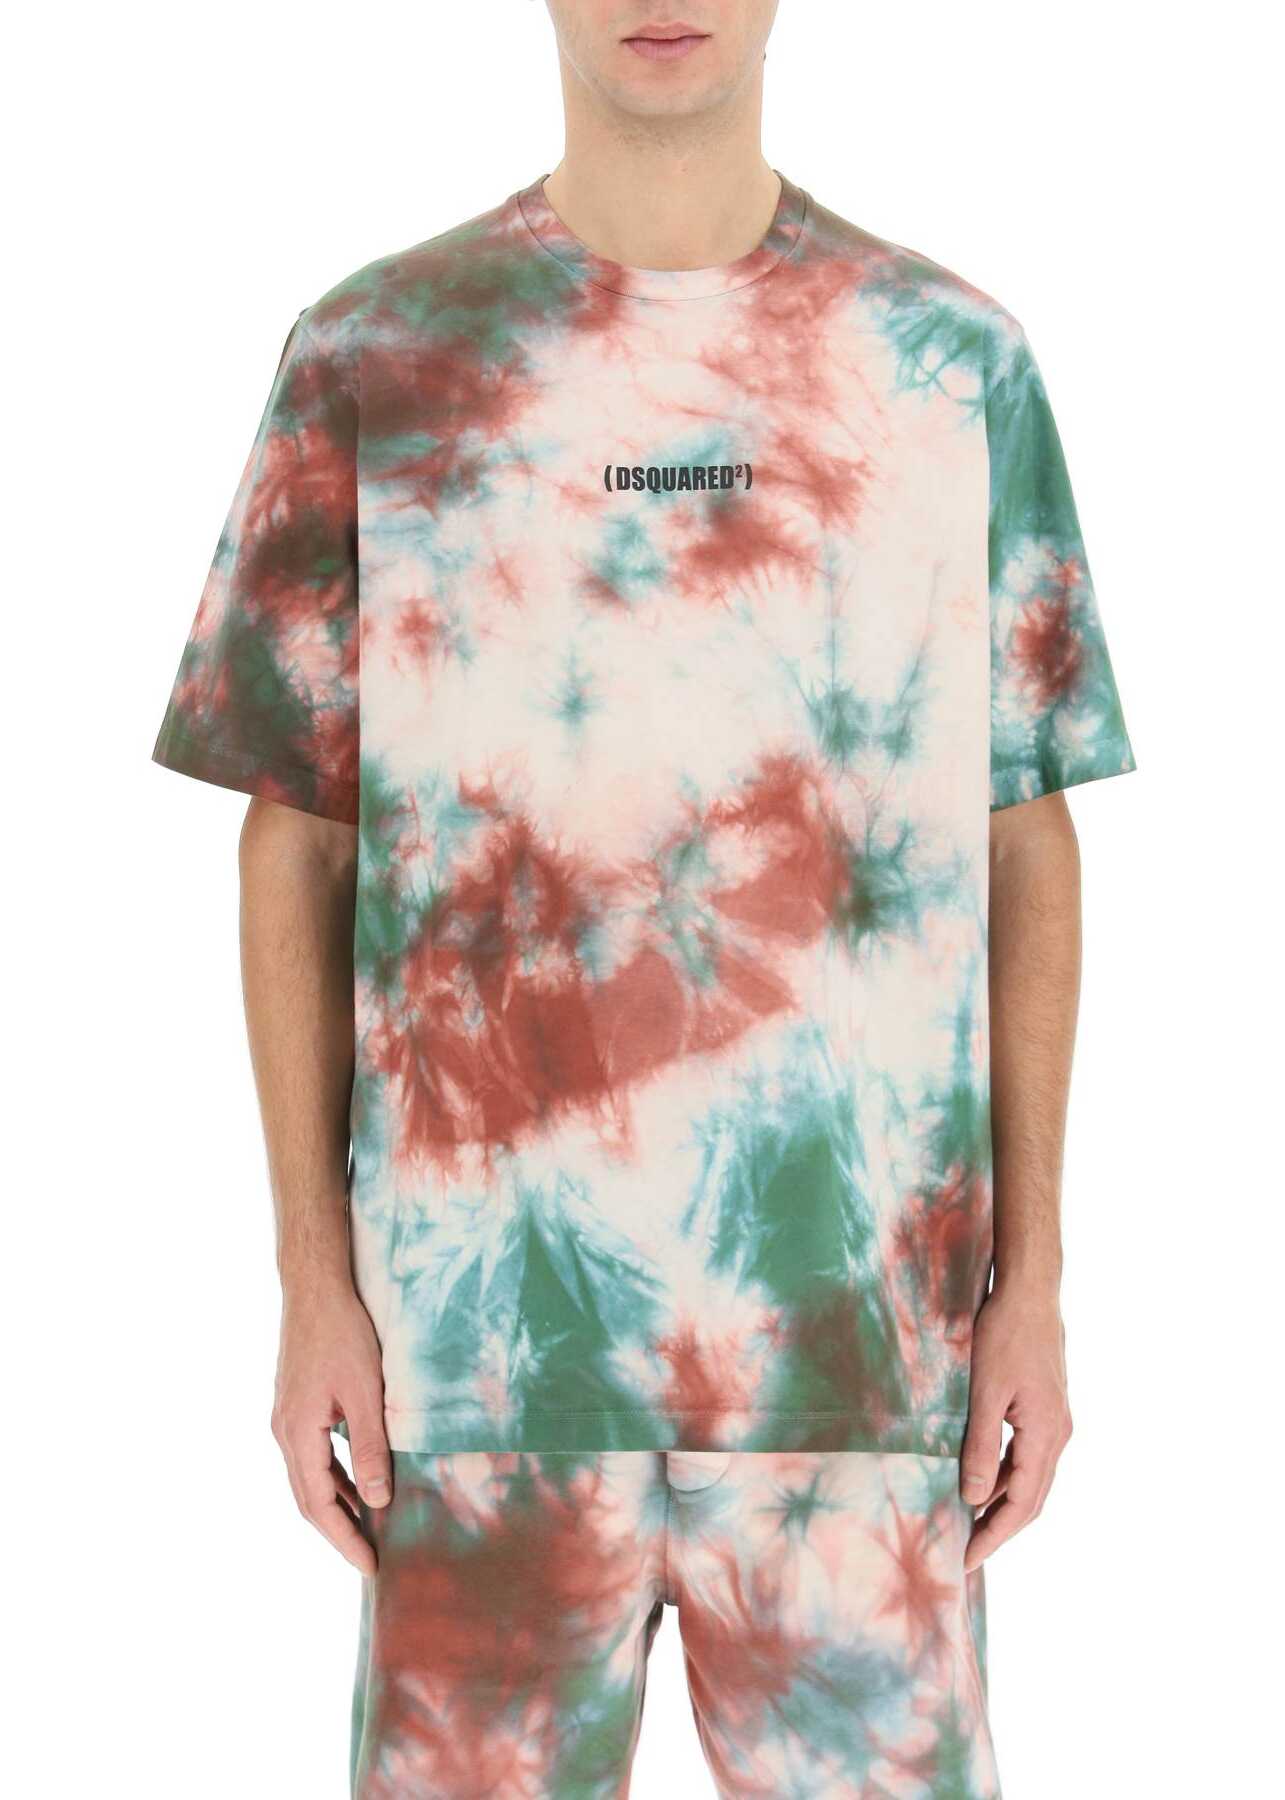 DSQUARED2 Tie-Dye T-Shirt S74GD0917 S22427 BEIGE GREEN RED